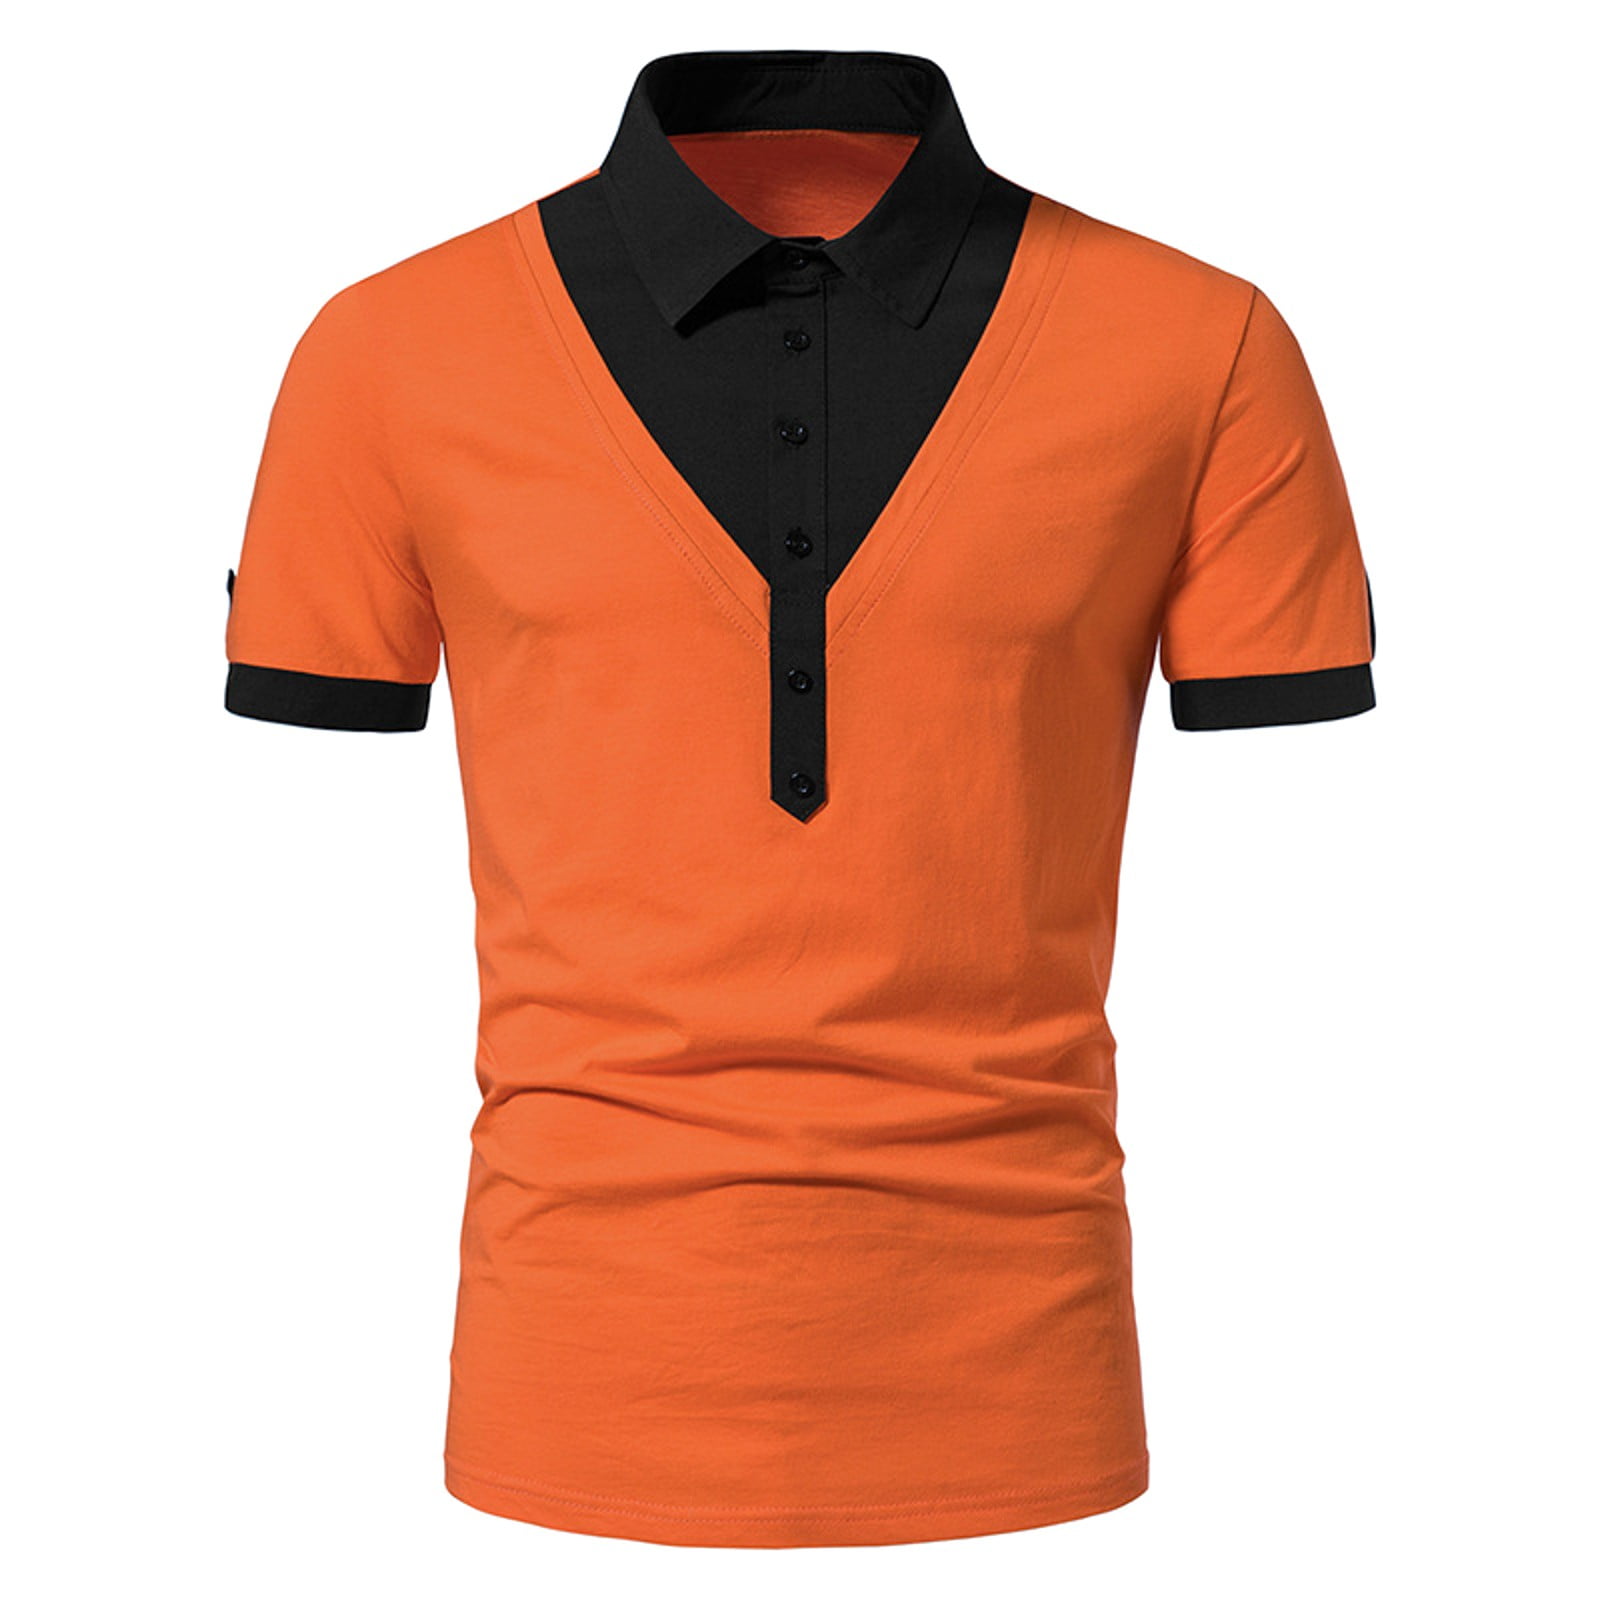 Pedort Polo Shirts For Men Golf Shirts for Men Dry Fit Short Sleeve ...